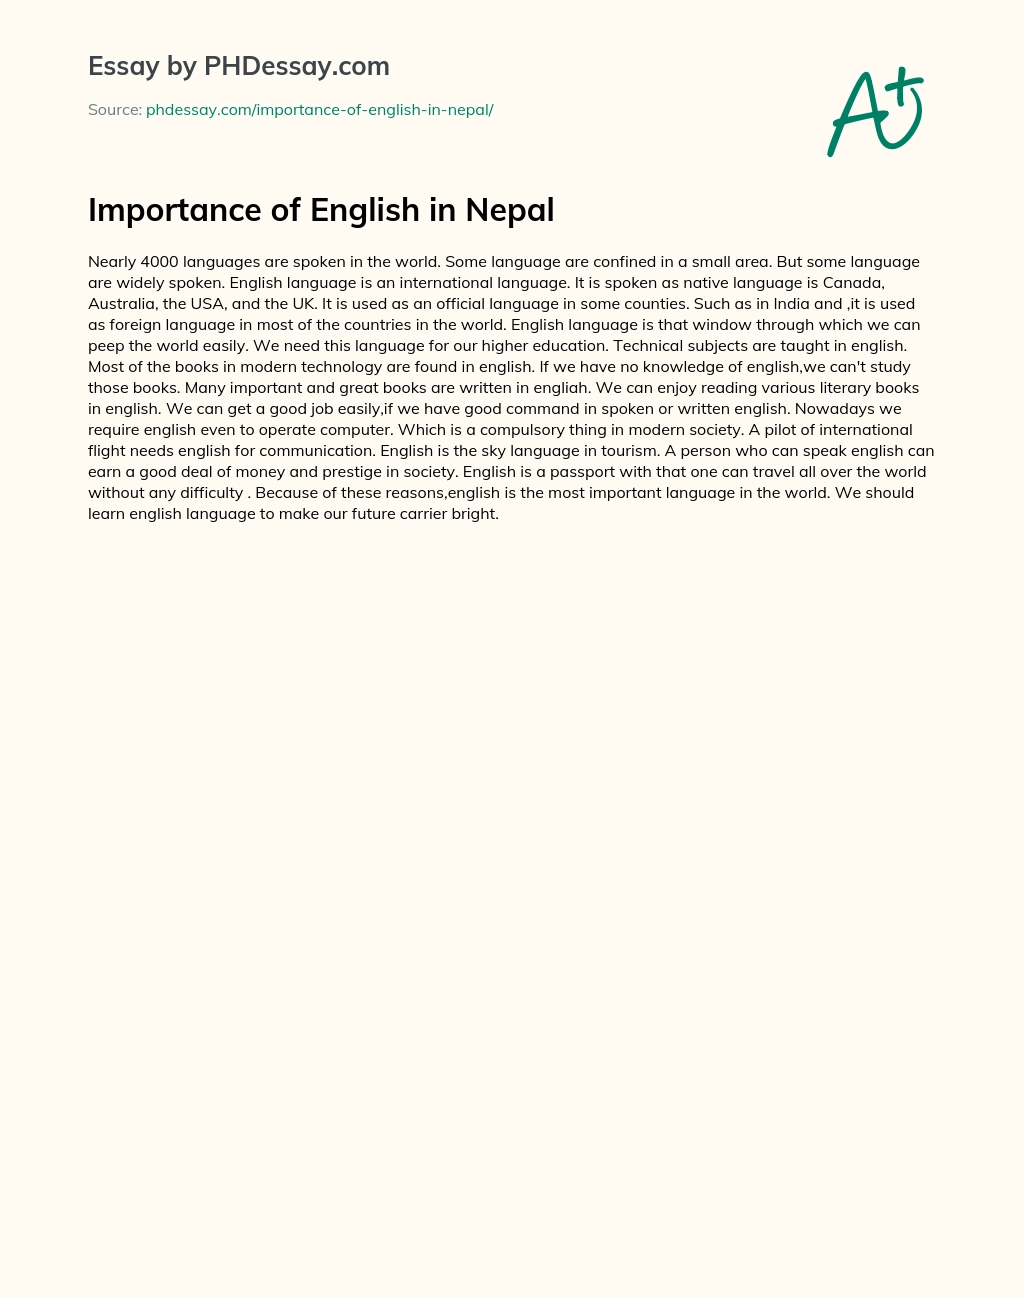 Importance of English in Nepal essay